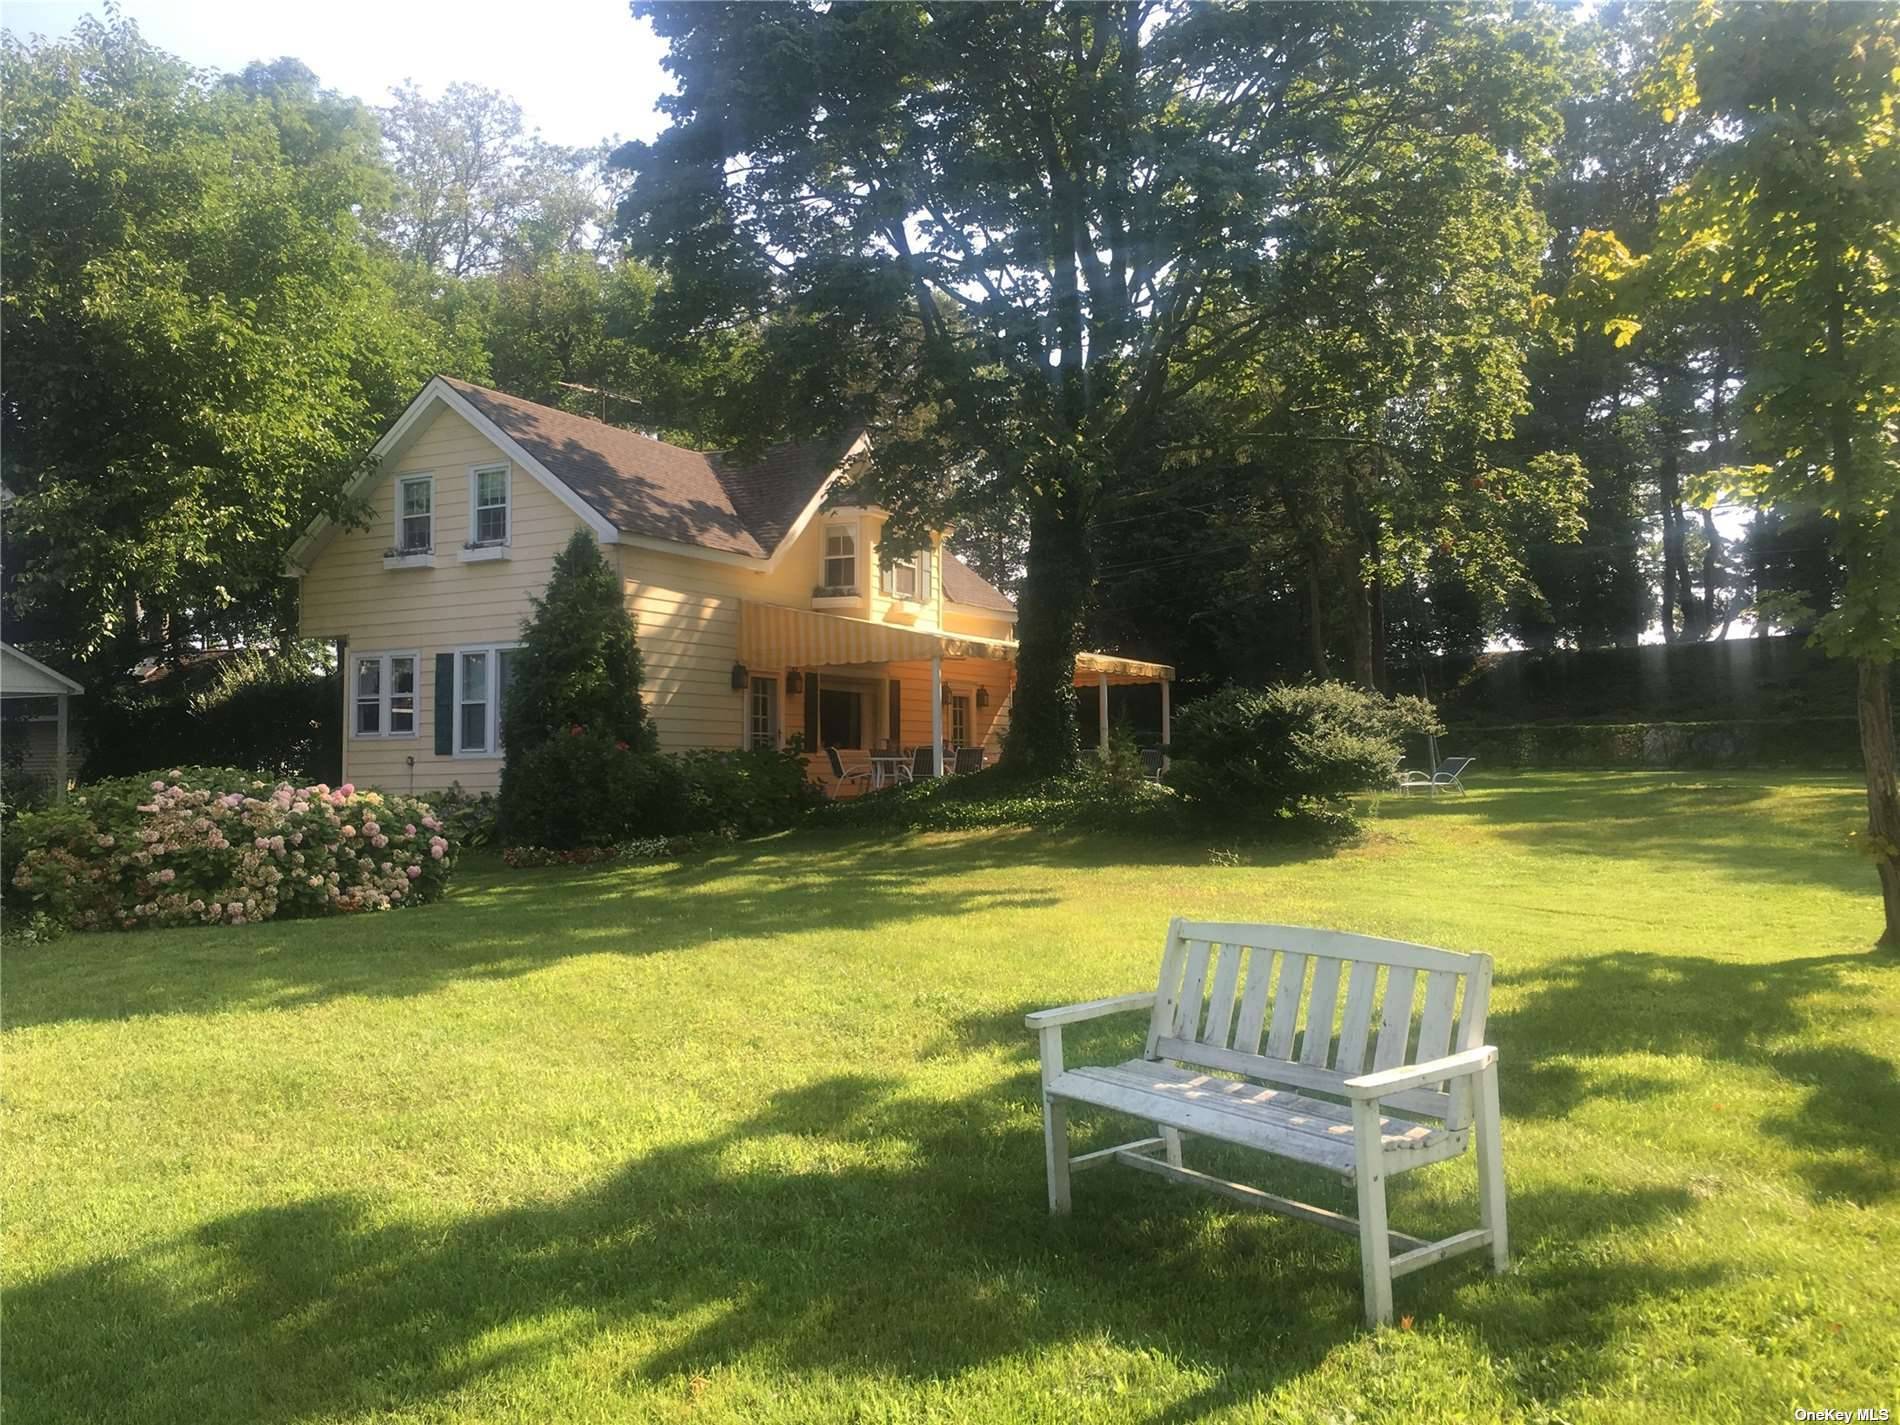 Impeccably maintained 2 Story Traditional house overlooking ocean estuary and surrounded by 100 acre wild bird sanctuary.